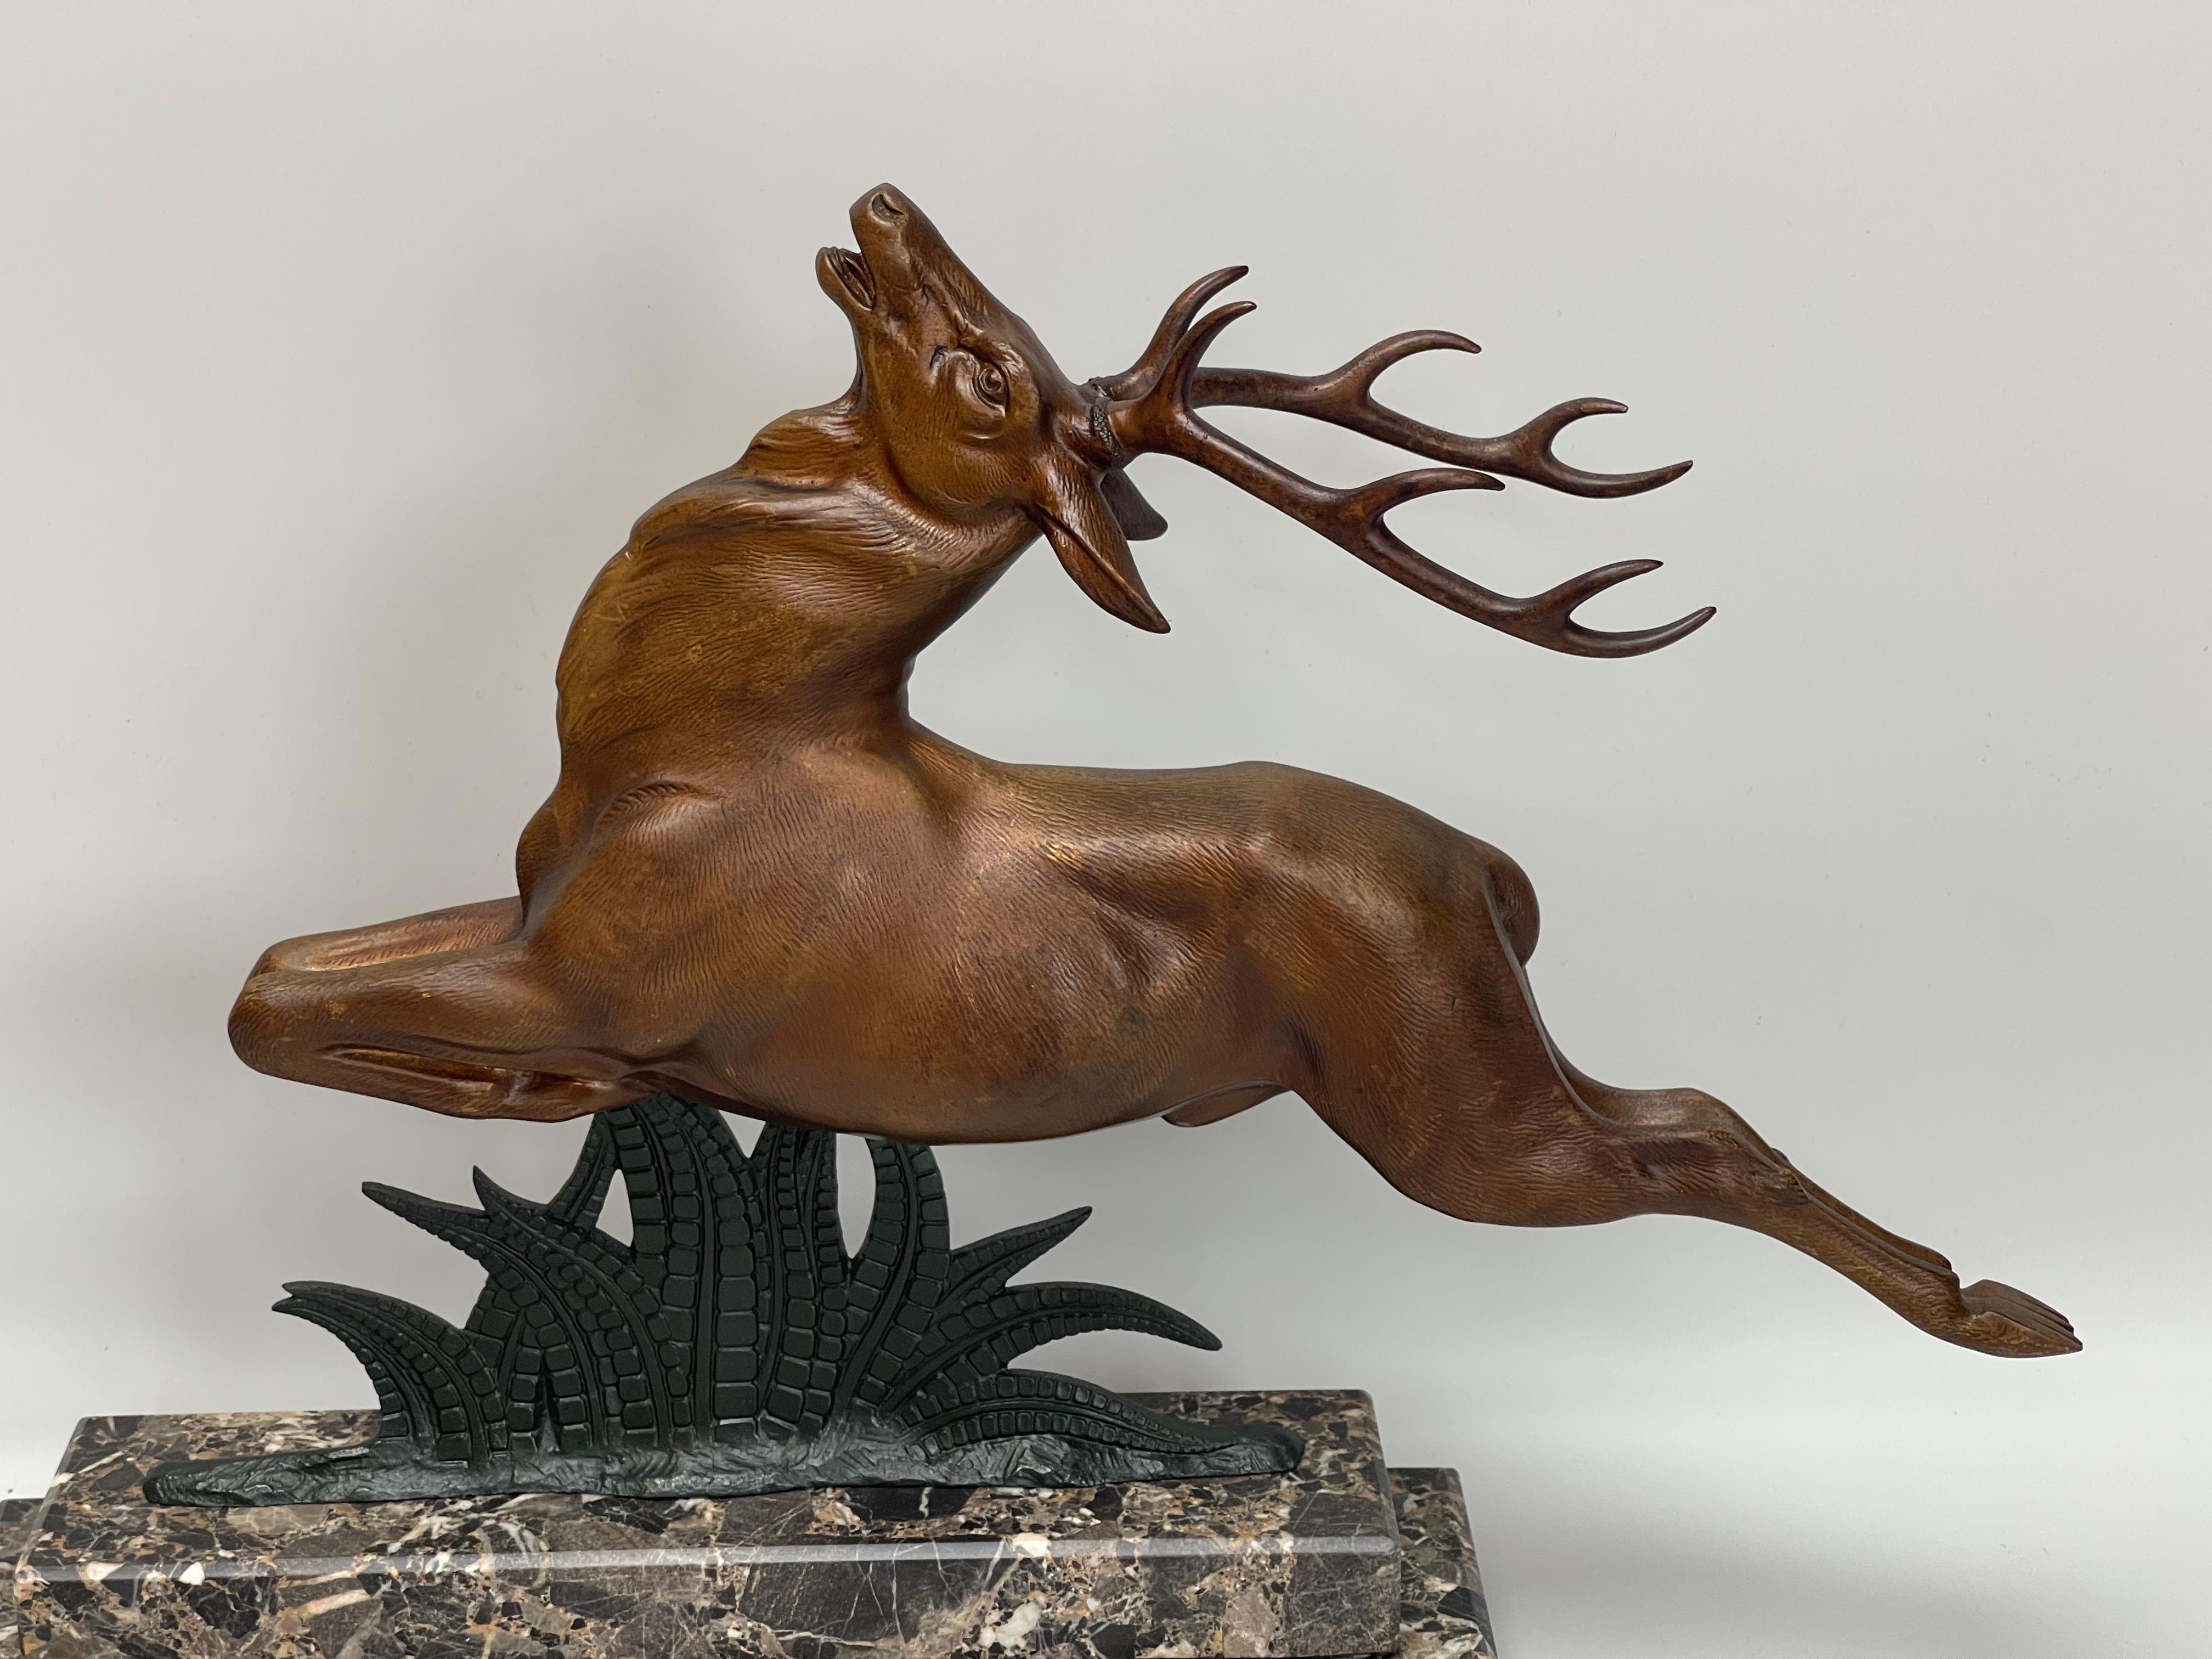 Art deco bronze around 1930 Deer with brown patina on a bacxia marble base signed on the marble L Alliot and stamped bronze on the deer.
In very good shape.
Length: 47cm
Width: 10cm
Height: 36cm
Weight: 8.1 Kg
For transport the bronze is